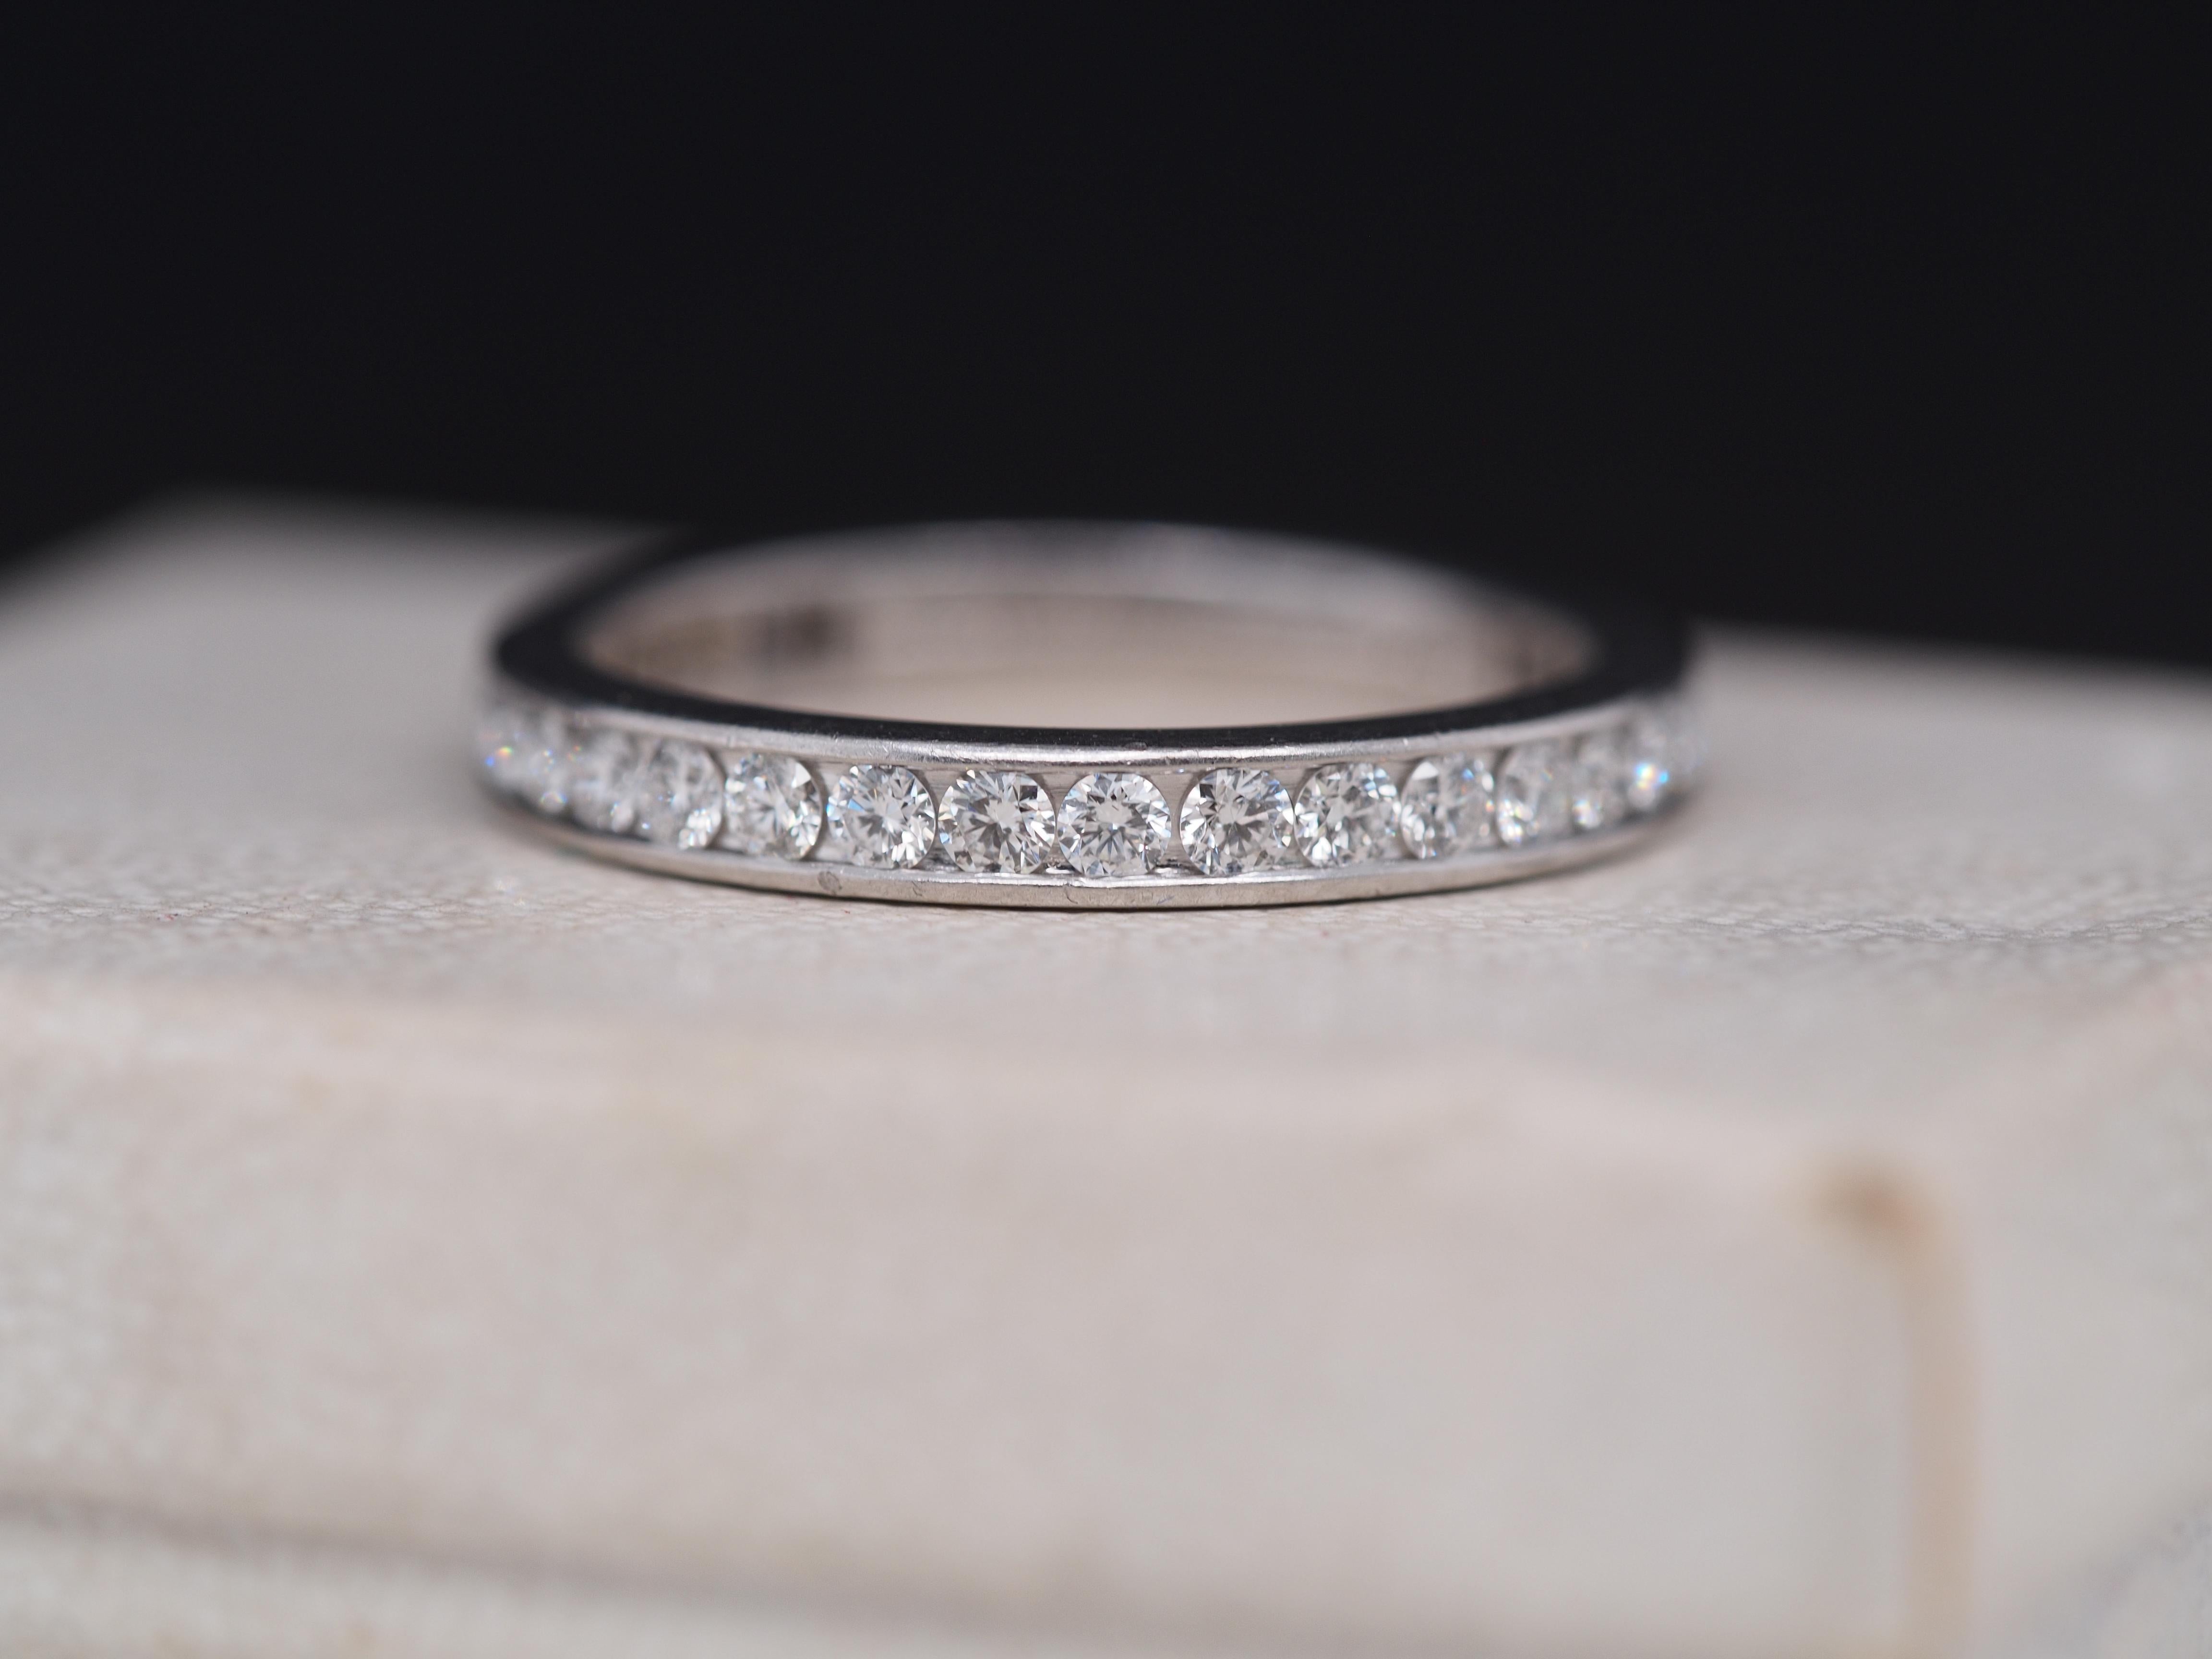 Ring Size: 5
Metal Type: Platinum [Hallmarked, and Tested]
Weight: 3.1 grams
Diamond Details: .75ct, total weight
Band Width: 2.5mm
Condition: Excellent